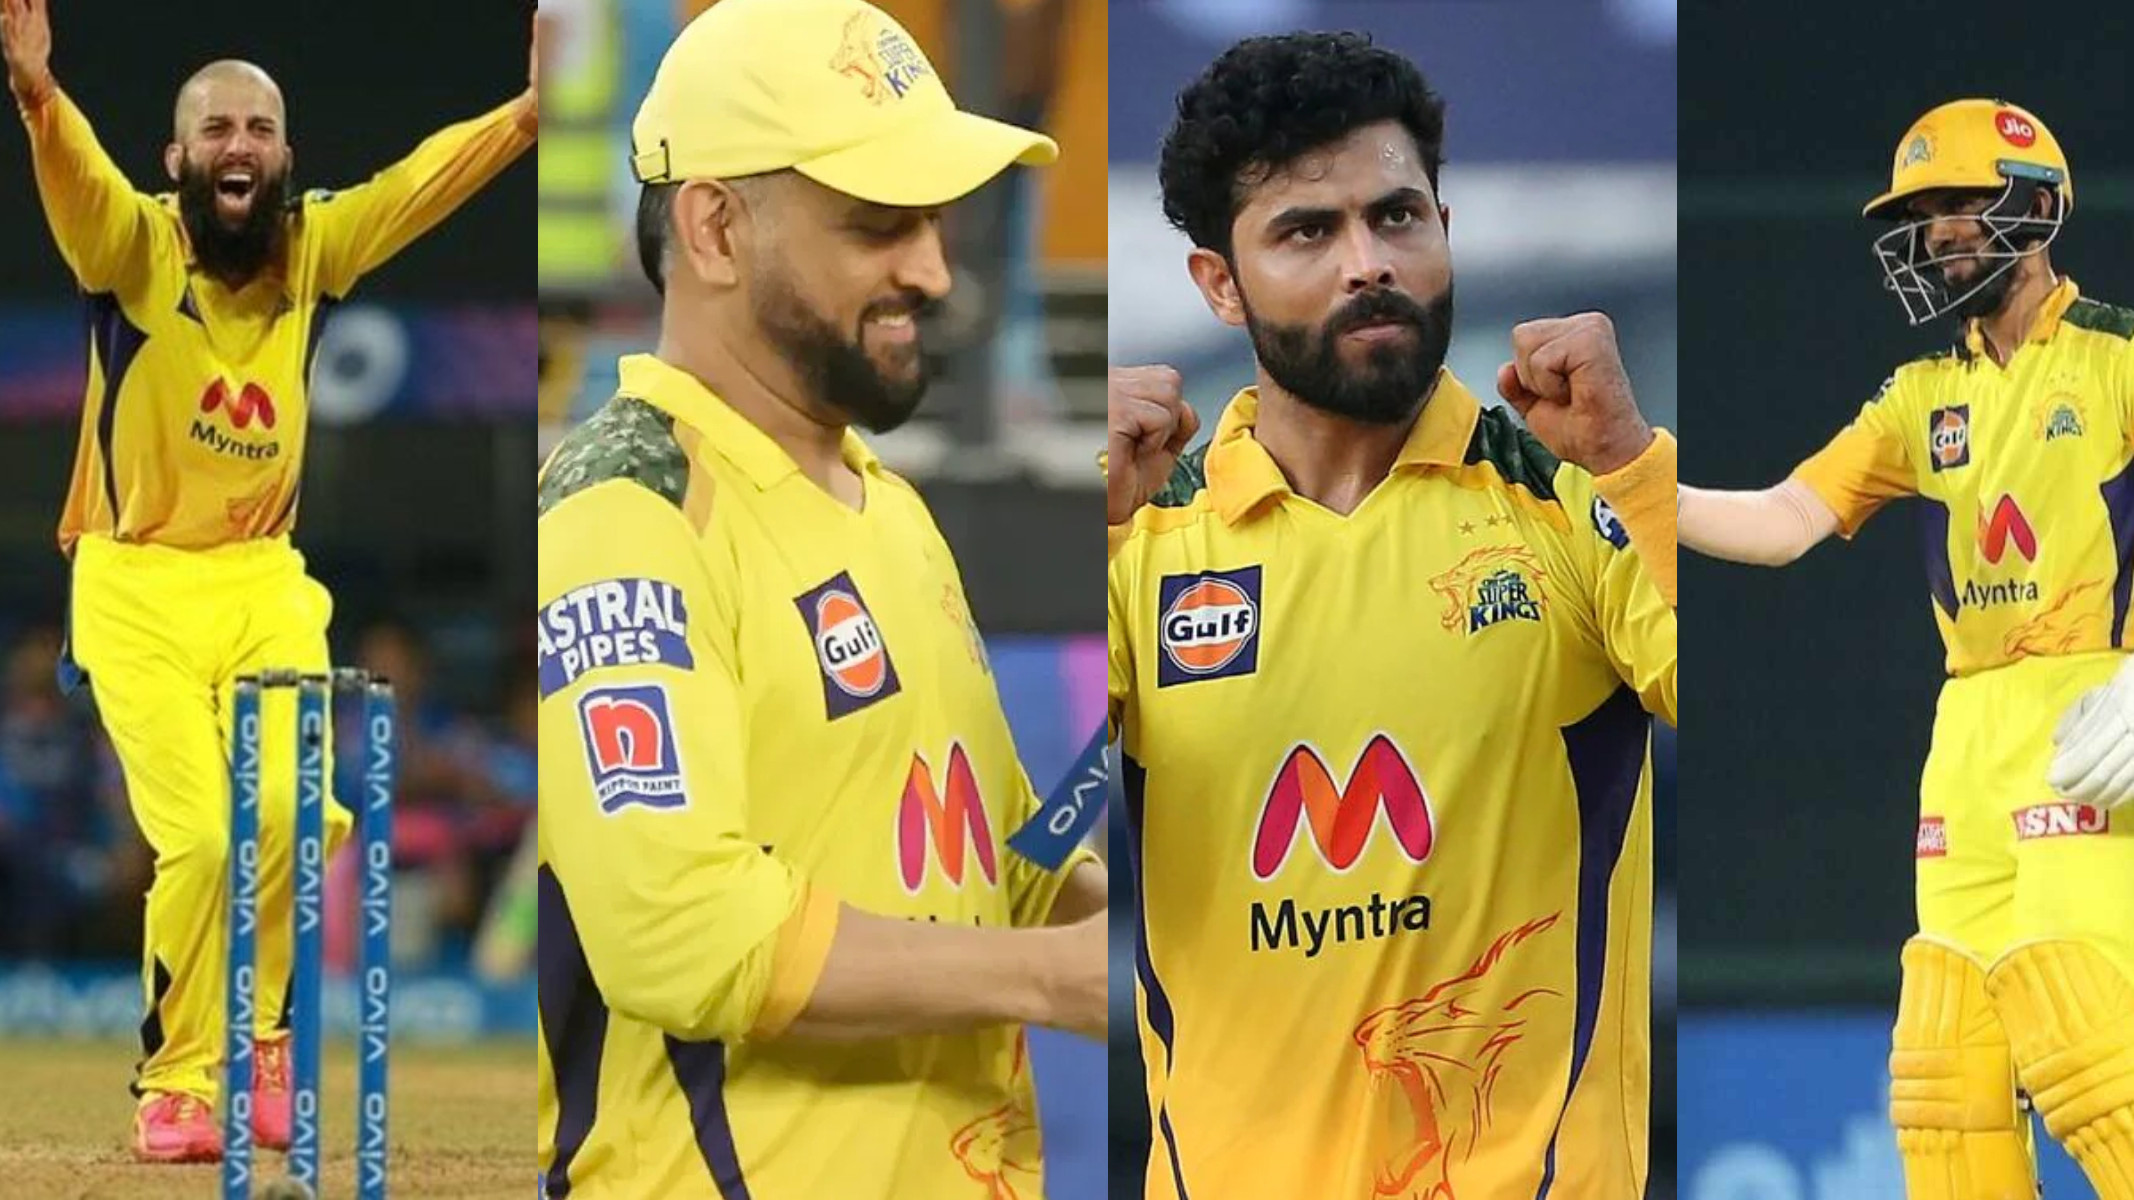 IPL 2022: COC presents Possible Playing XI for Chennai Super Kings (CSK)